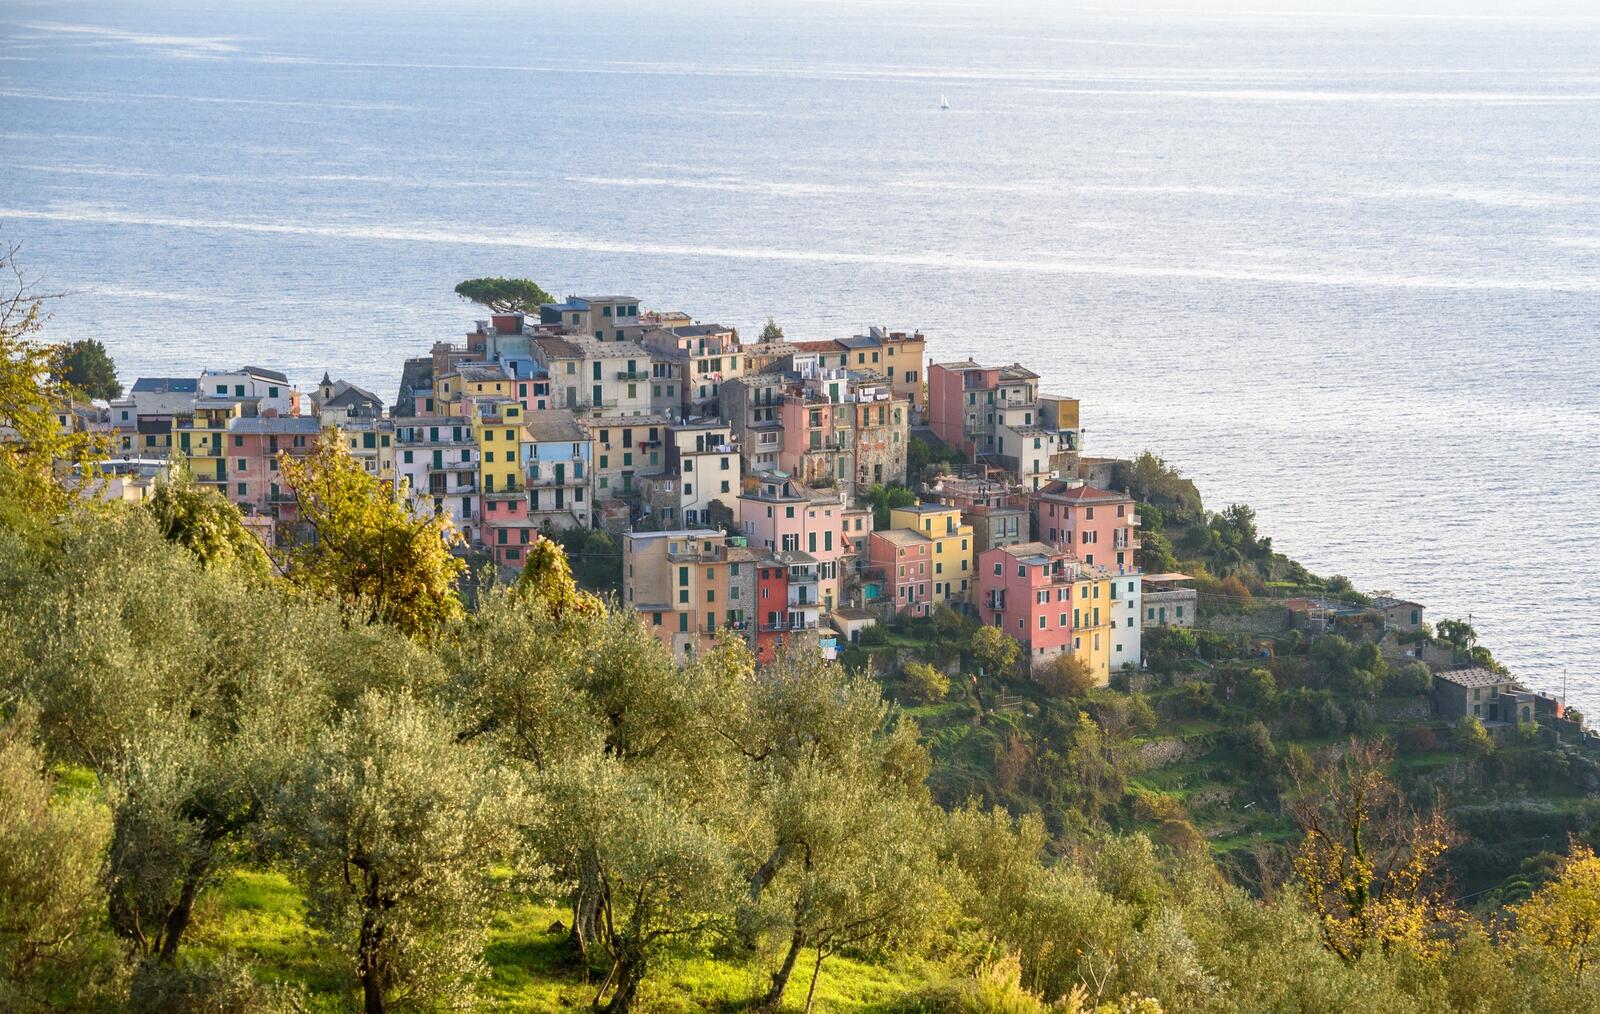 Free photo A region in Italy called Liguria